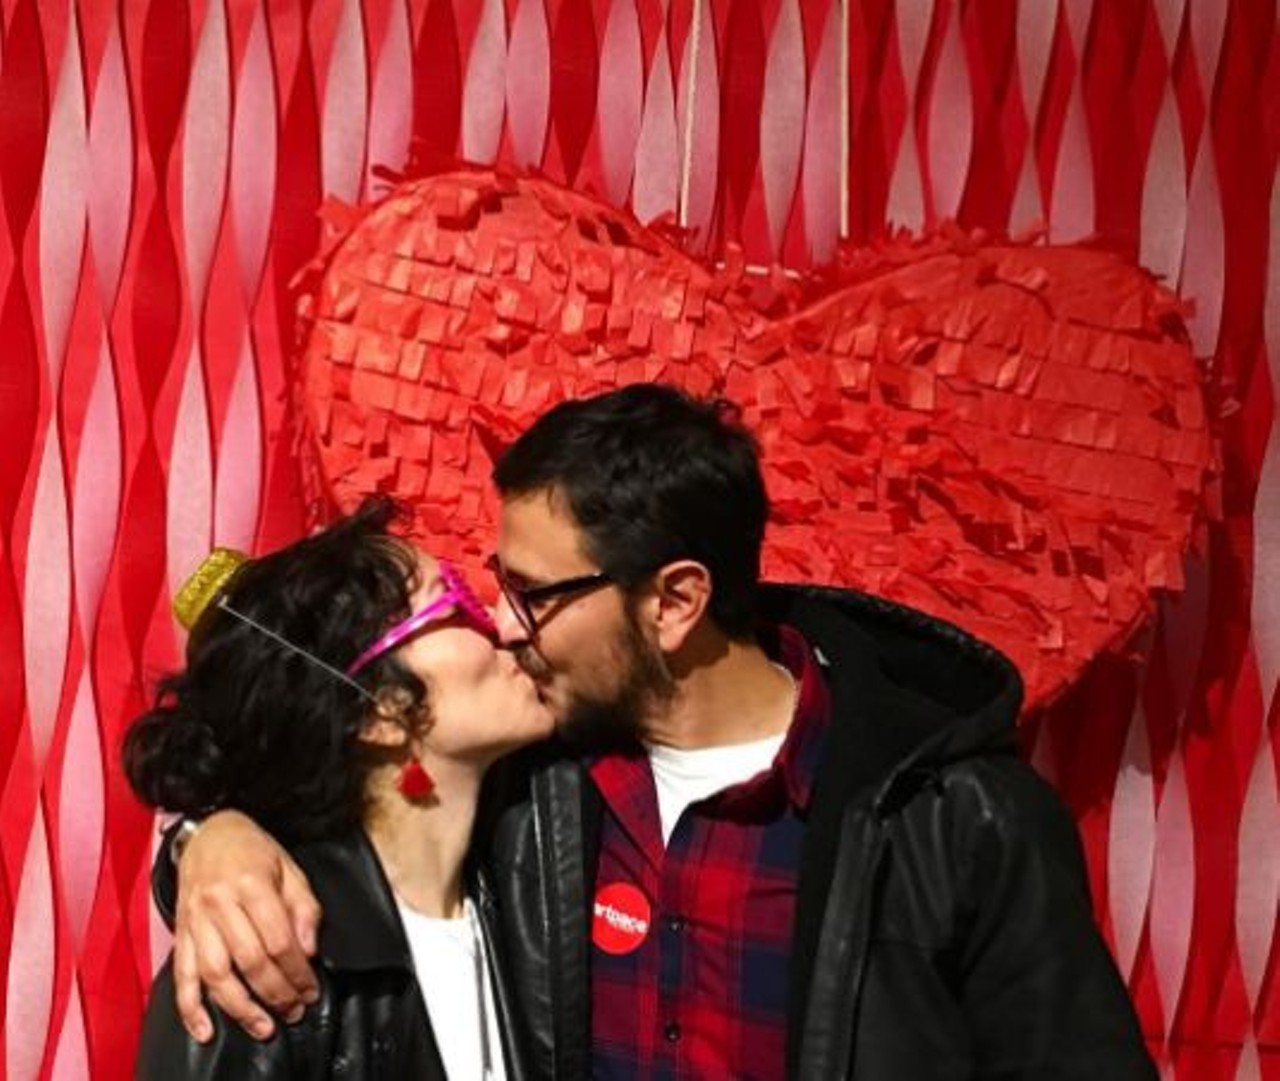 Artpace 
445 N. Main Avenue, (210) 212-4900 
Artpace&#146;s exhibits are the perfect backdrop for a steamy kiss. 
Photo via Instagram, danielriosrodriguez